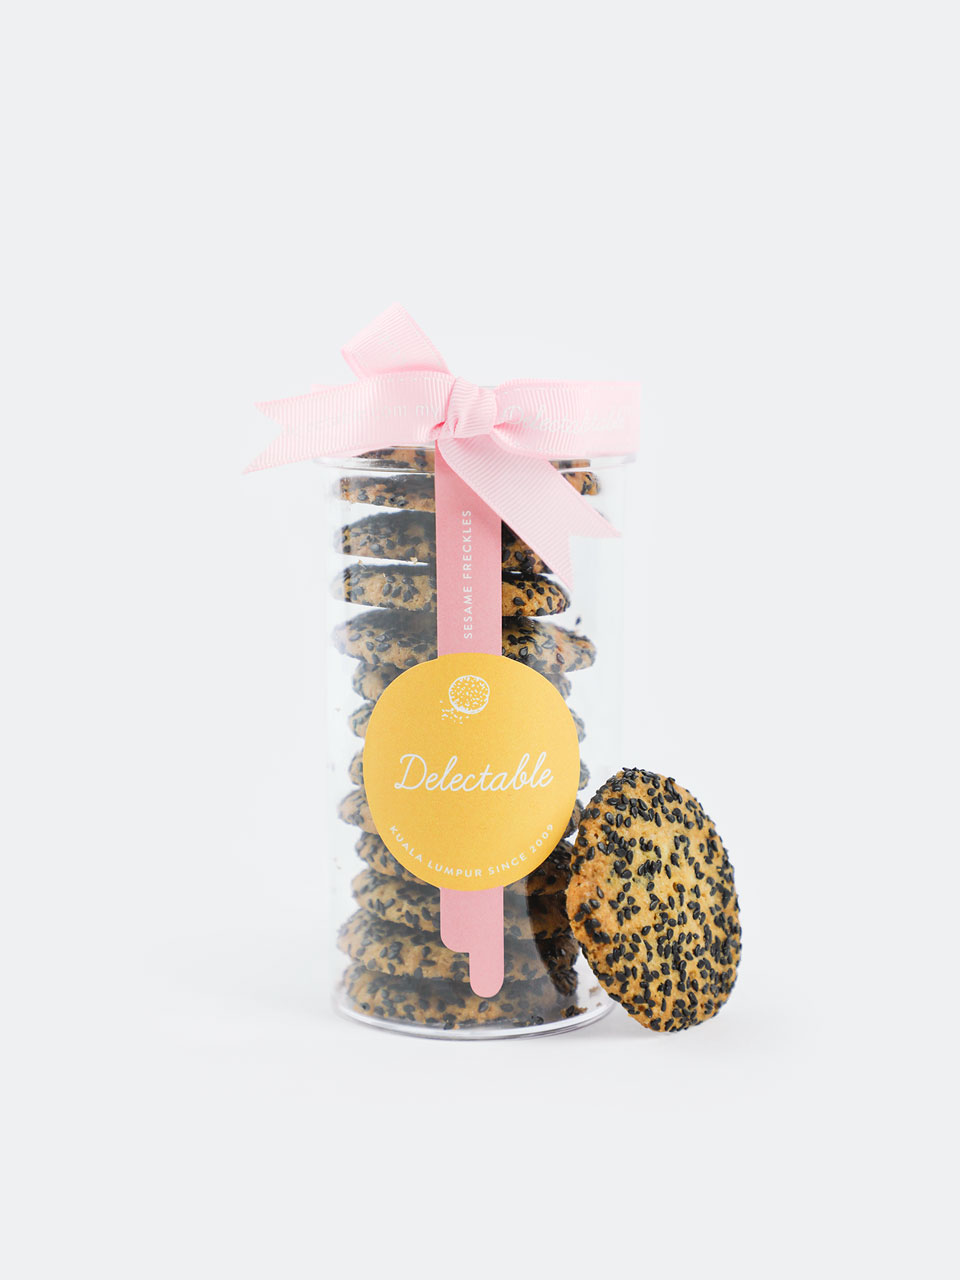 Delectable Cookies - Cookies delivery Malaysia